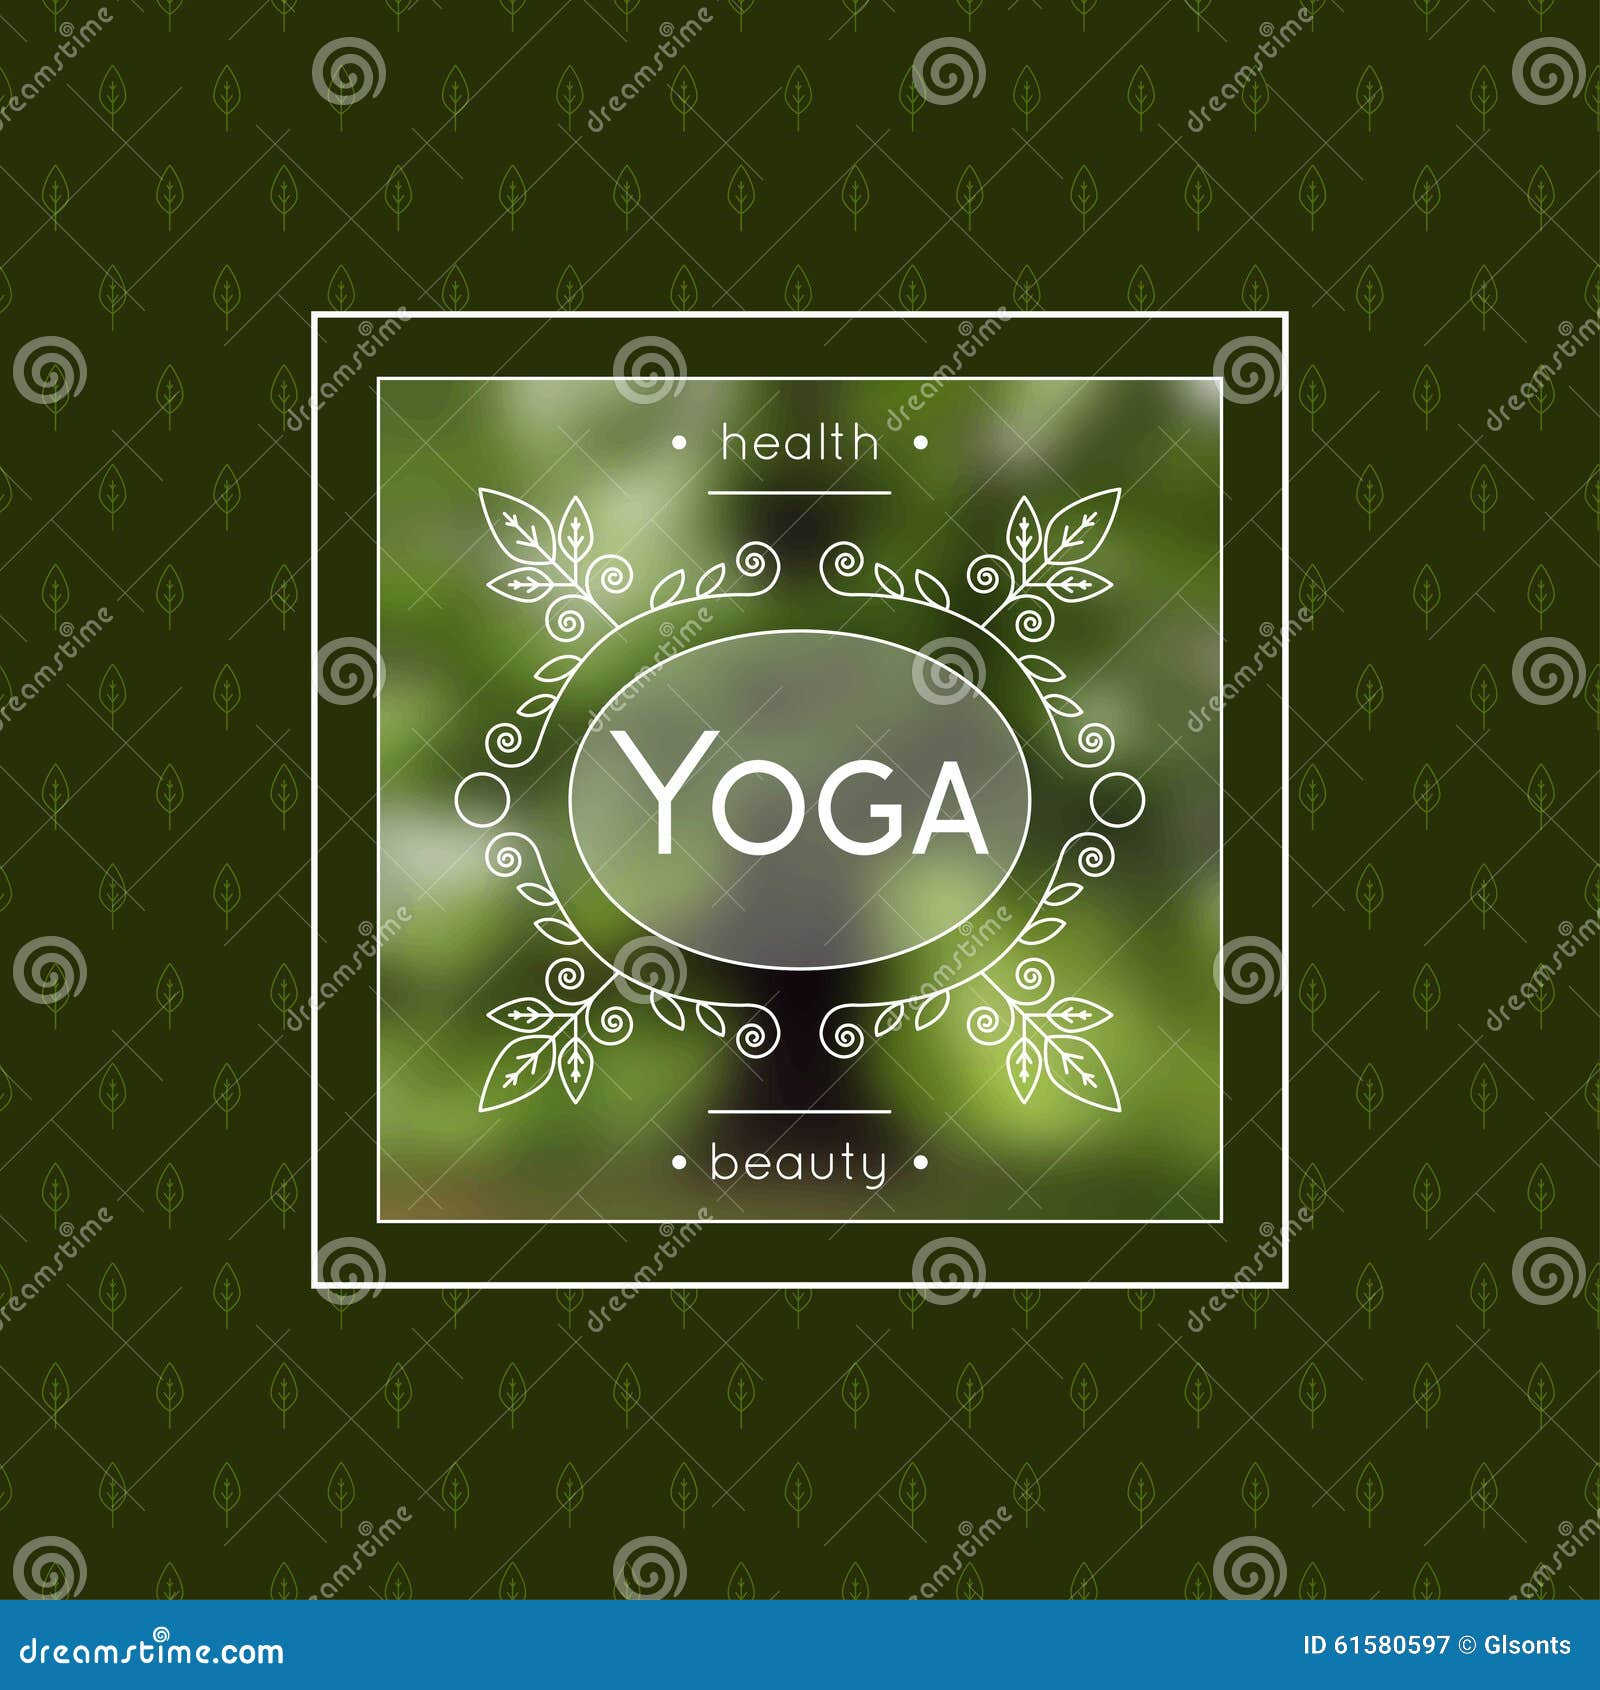 Yoga Poster with Floral Ornament for SPA, Yoga Studio, Beauty Salon ...